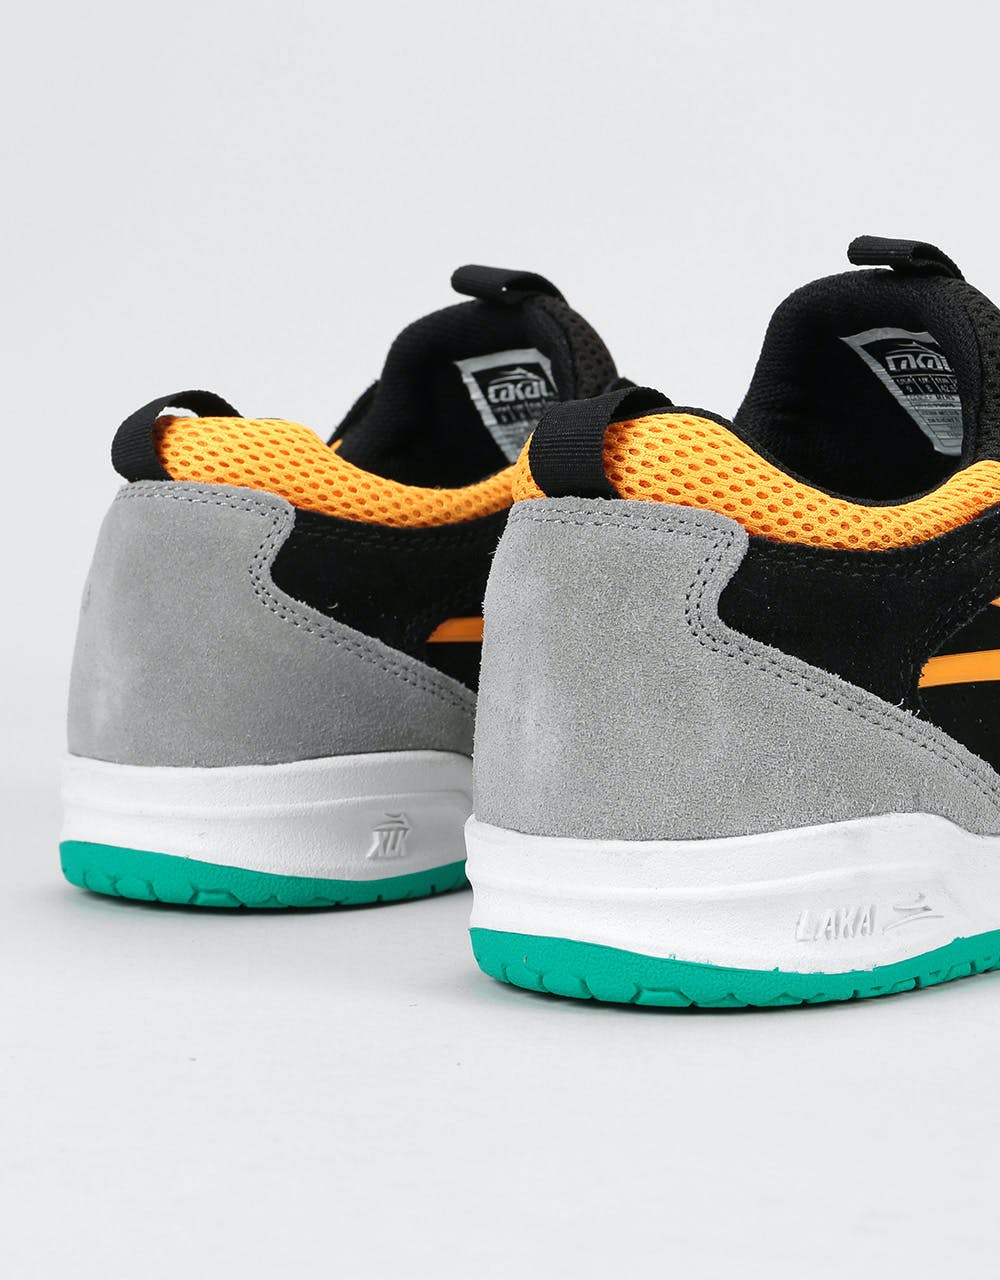 Lakai The Proto Skate Shoes - Grey/Teal Suede